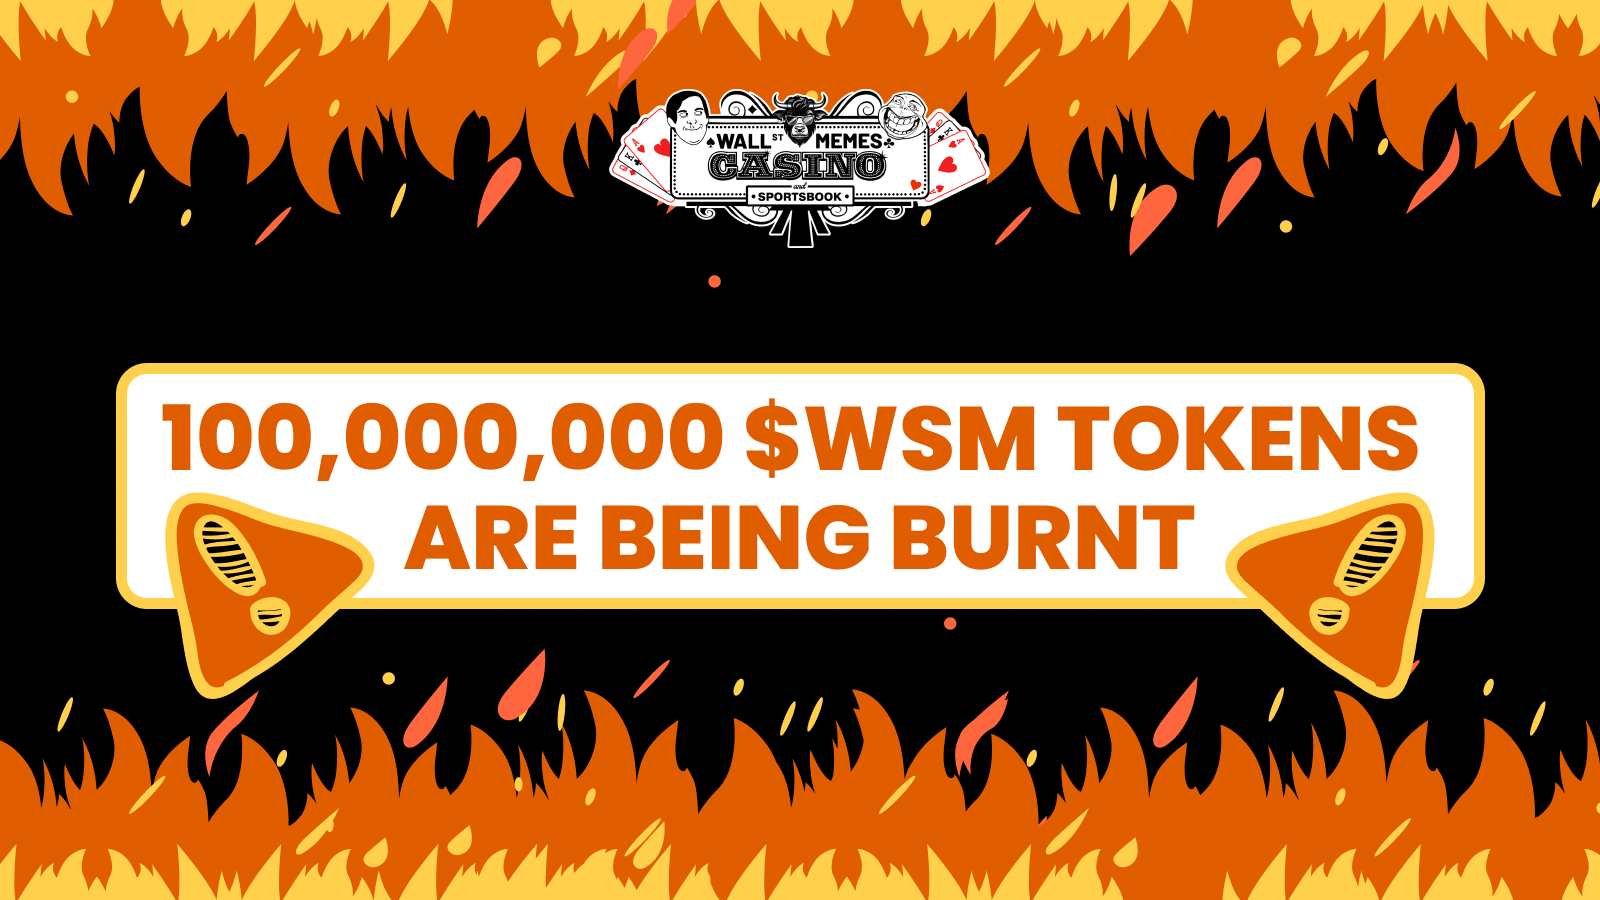 $WSM News: Wall Street Memes have announced 5% of supply will be burned from WSM Casino NGR, but how could this impact on price in the future?